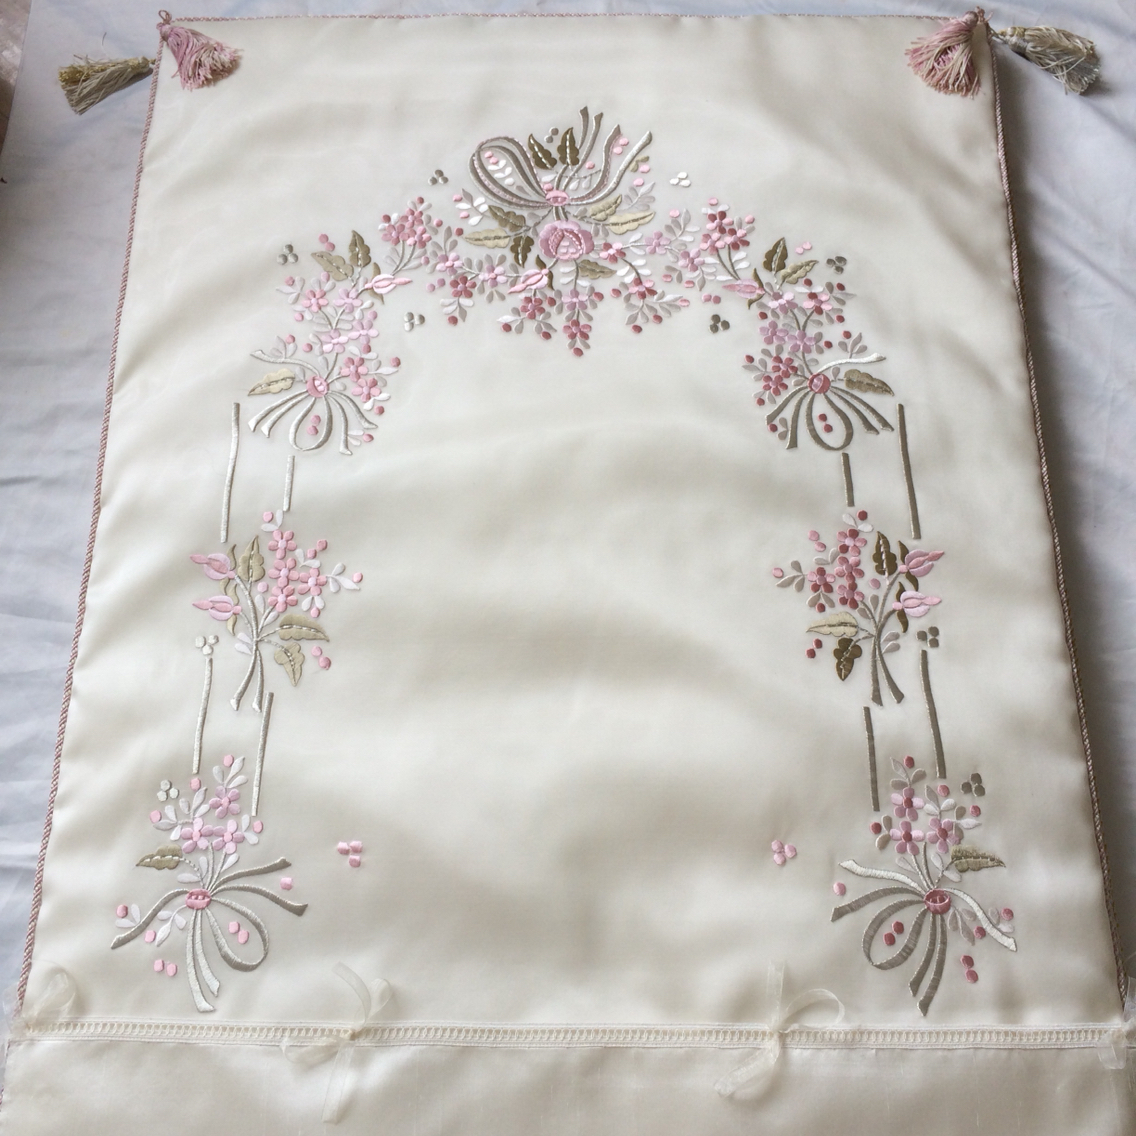 Free Machine Embroidery Patterns Tablecloth Flowers Machine Embroidery Designs 50 Based On 10 Reviews Ask First Question